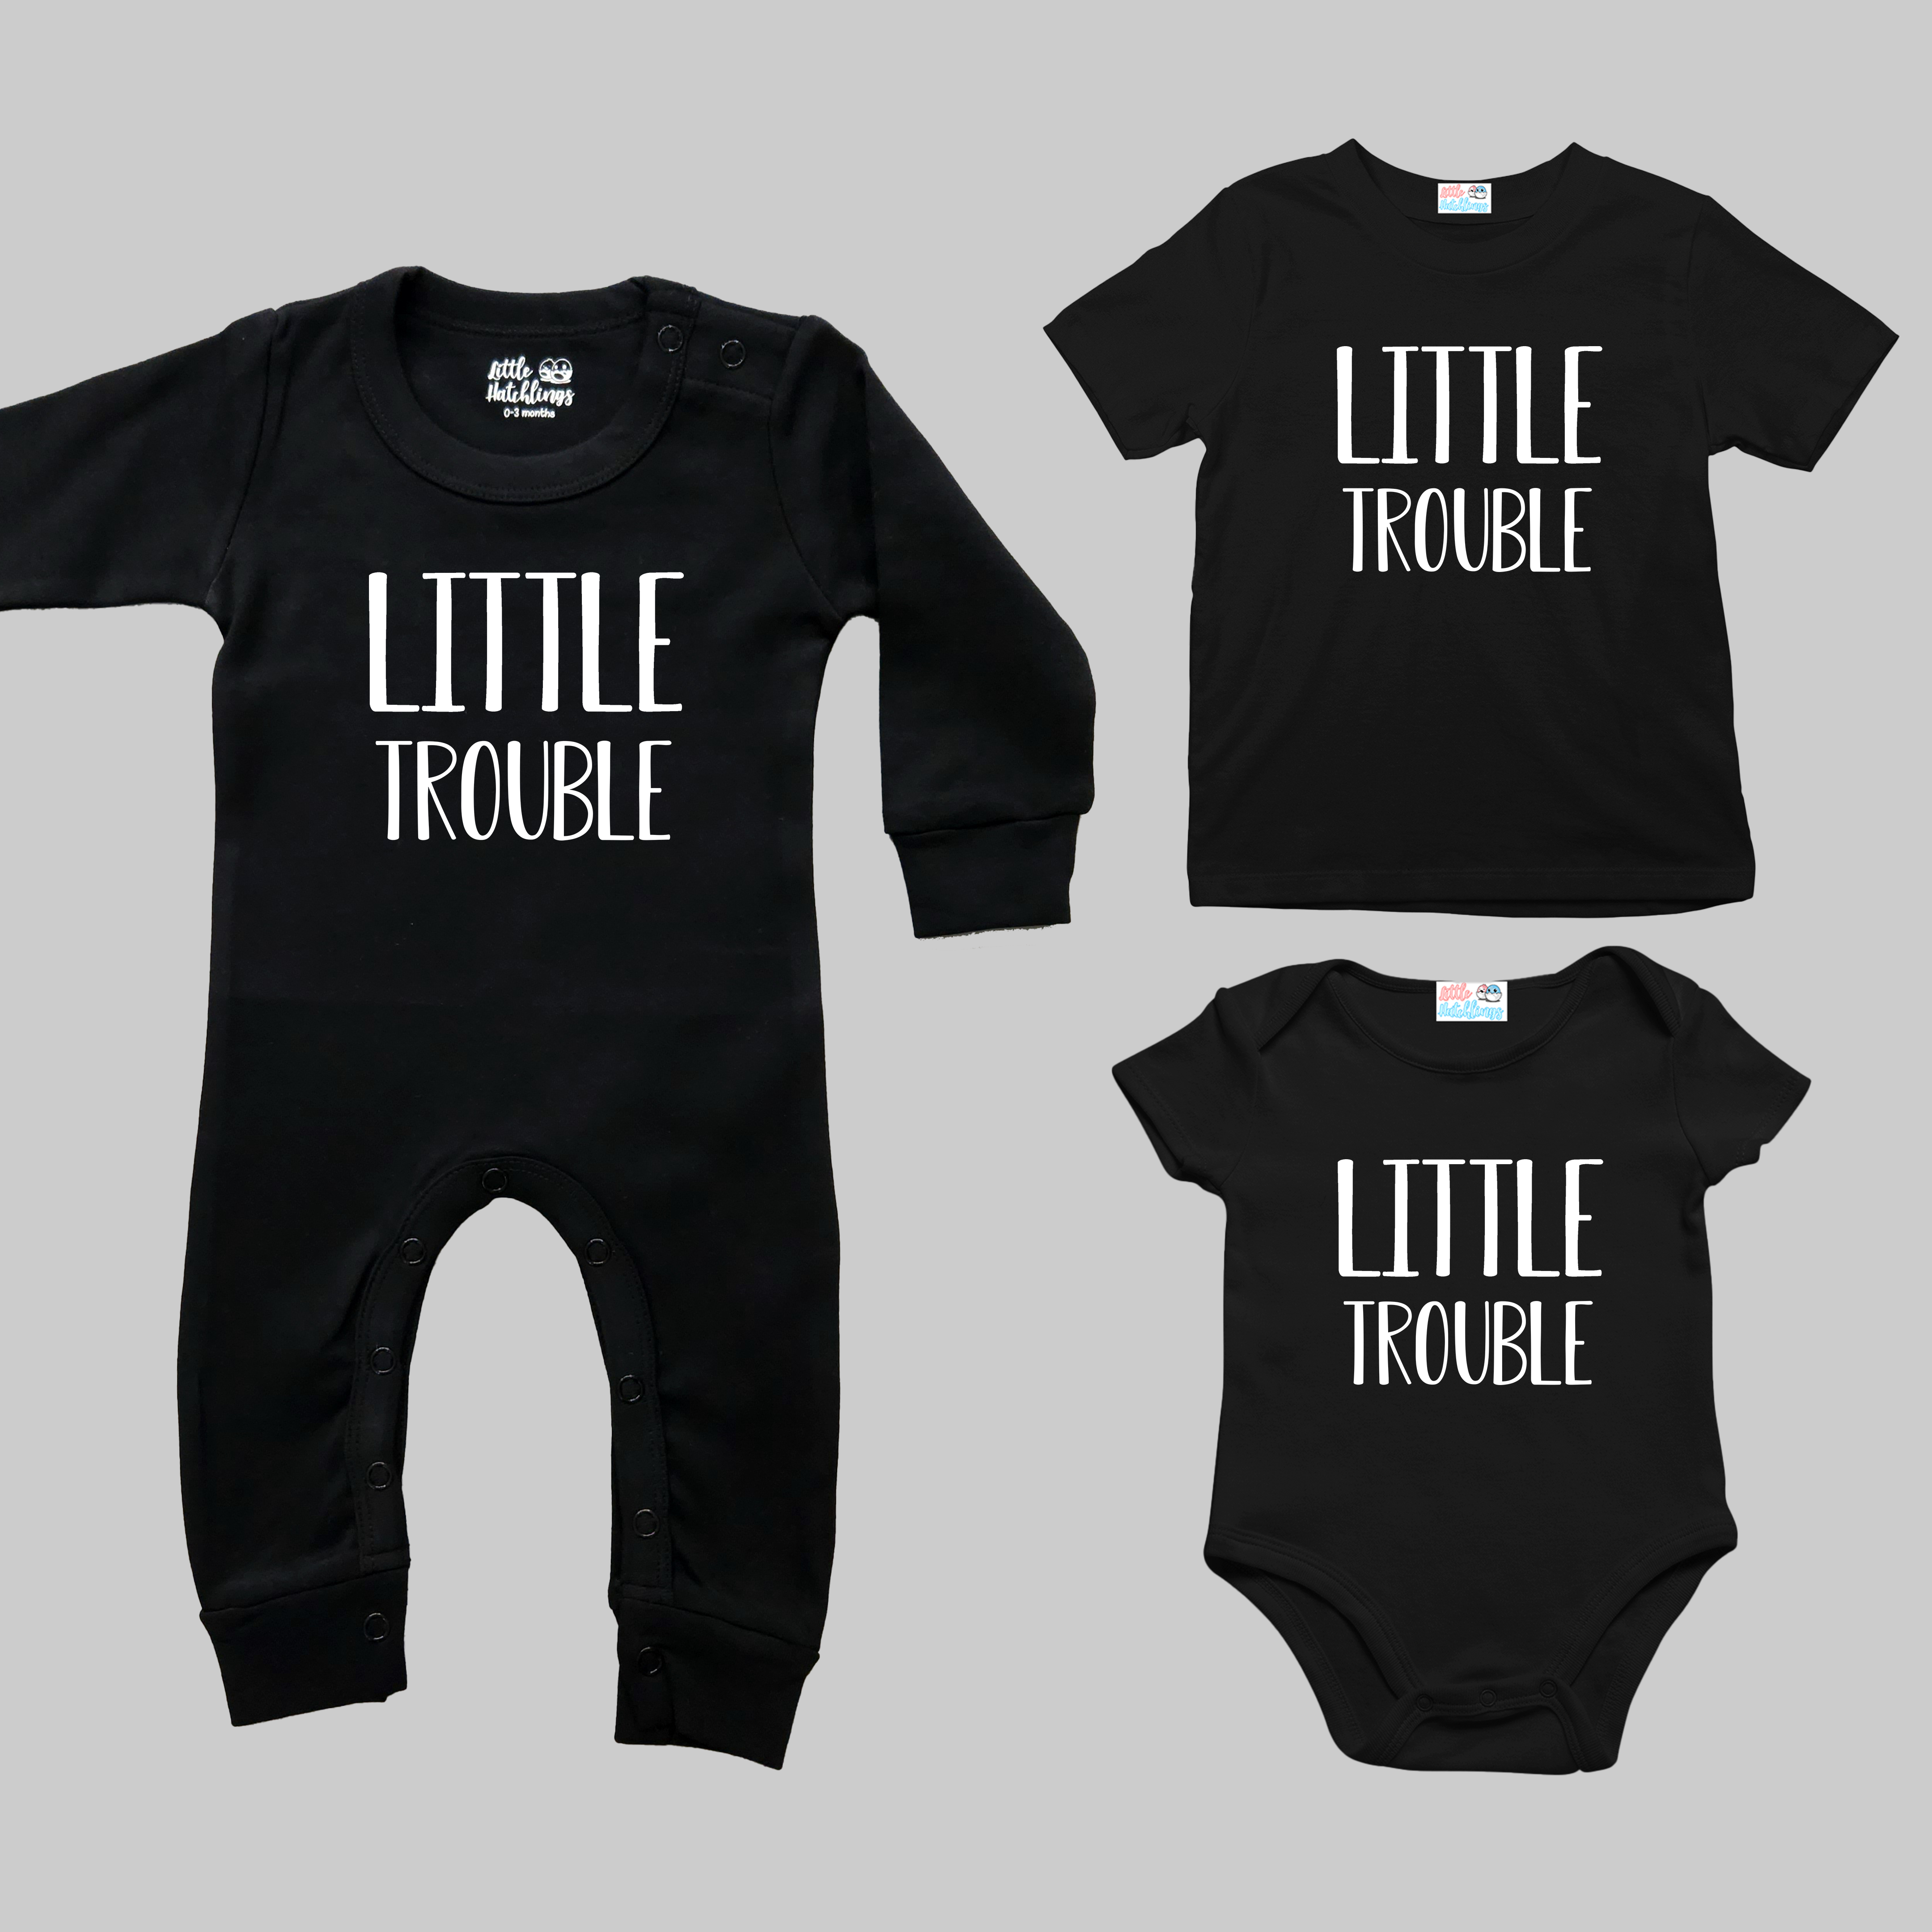 Big + Little Trouble Black and Grey Combo - Onesie + Adult T-shirt